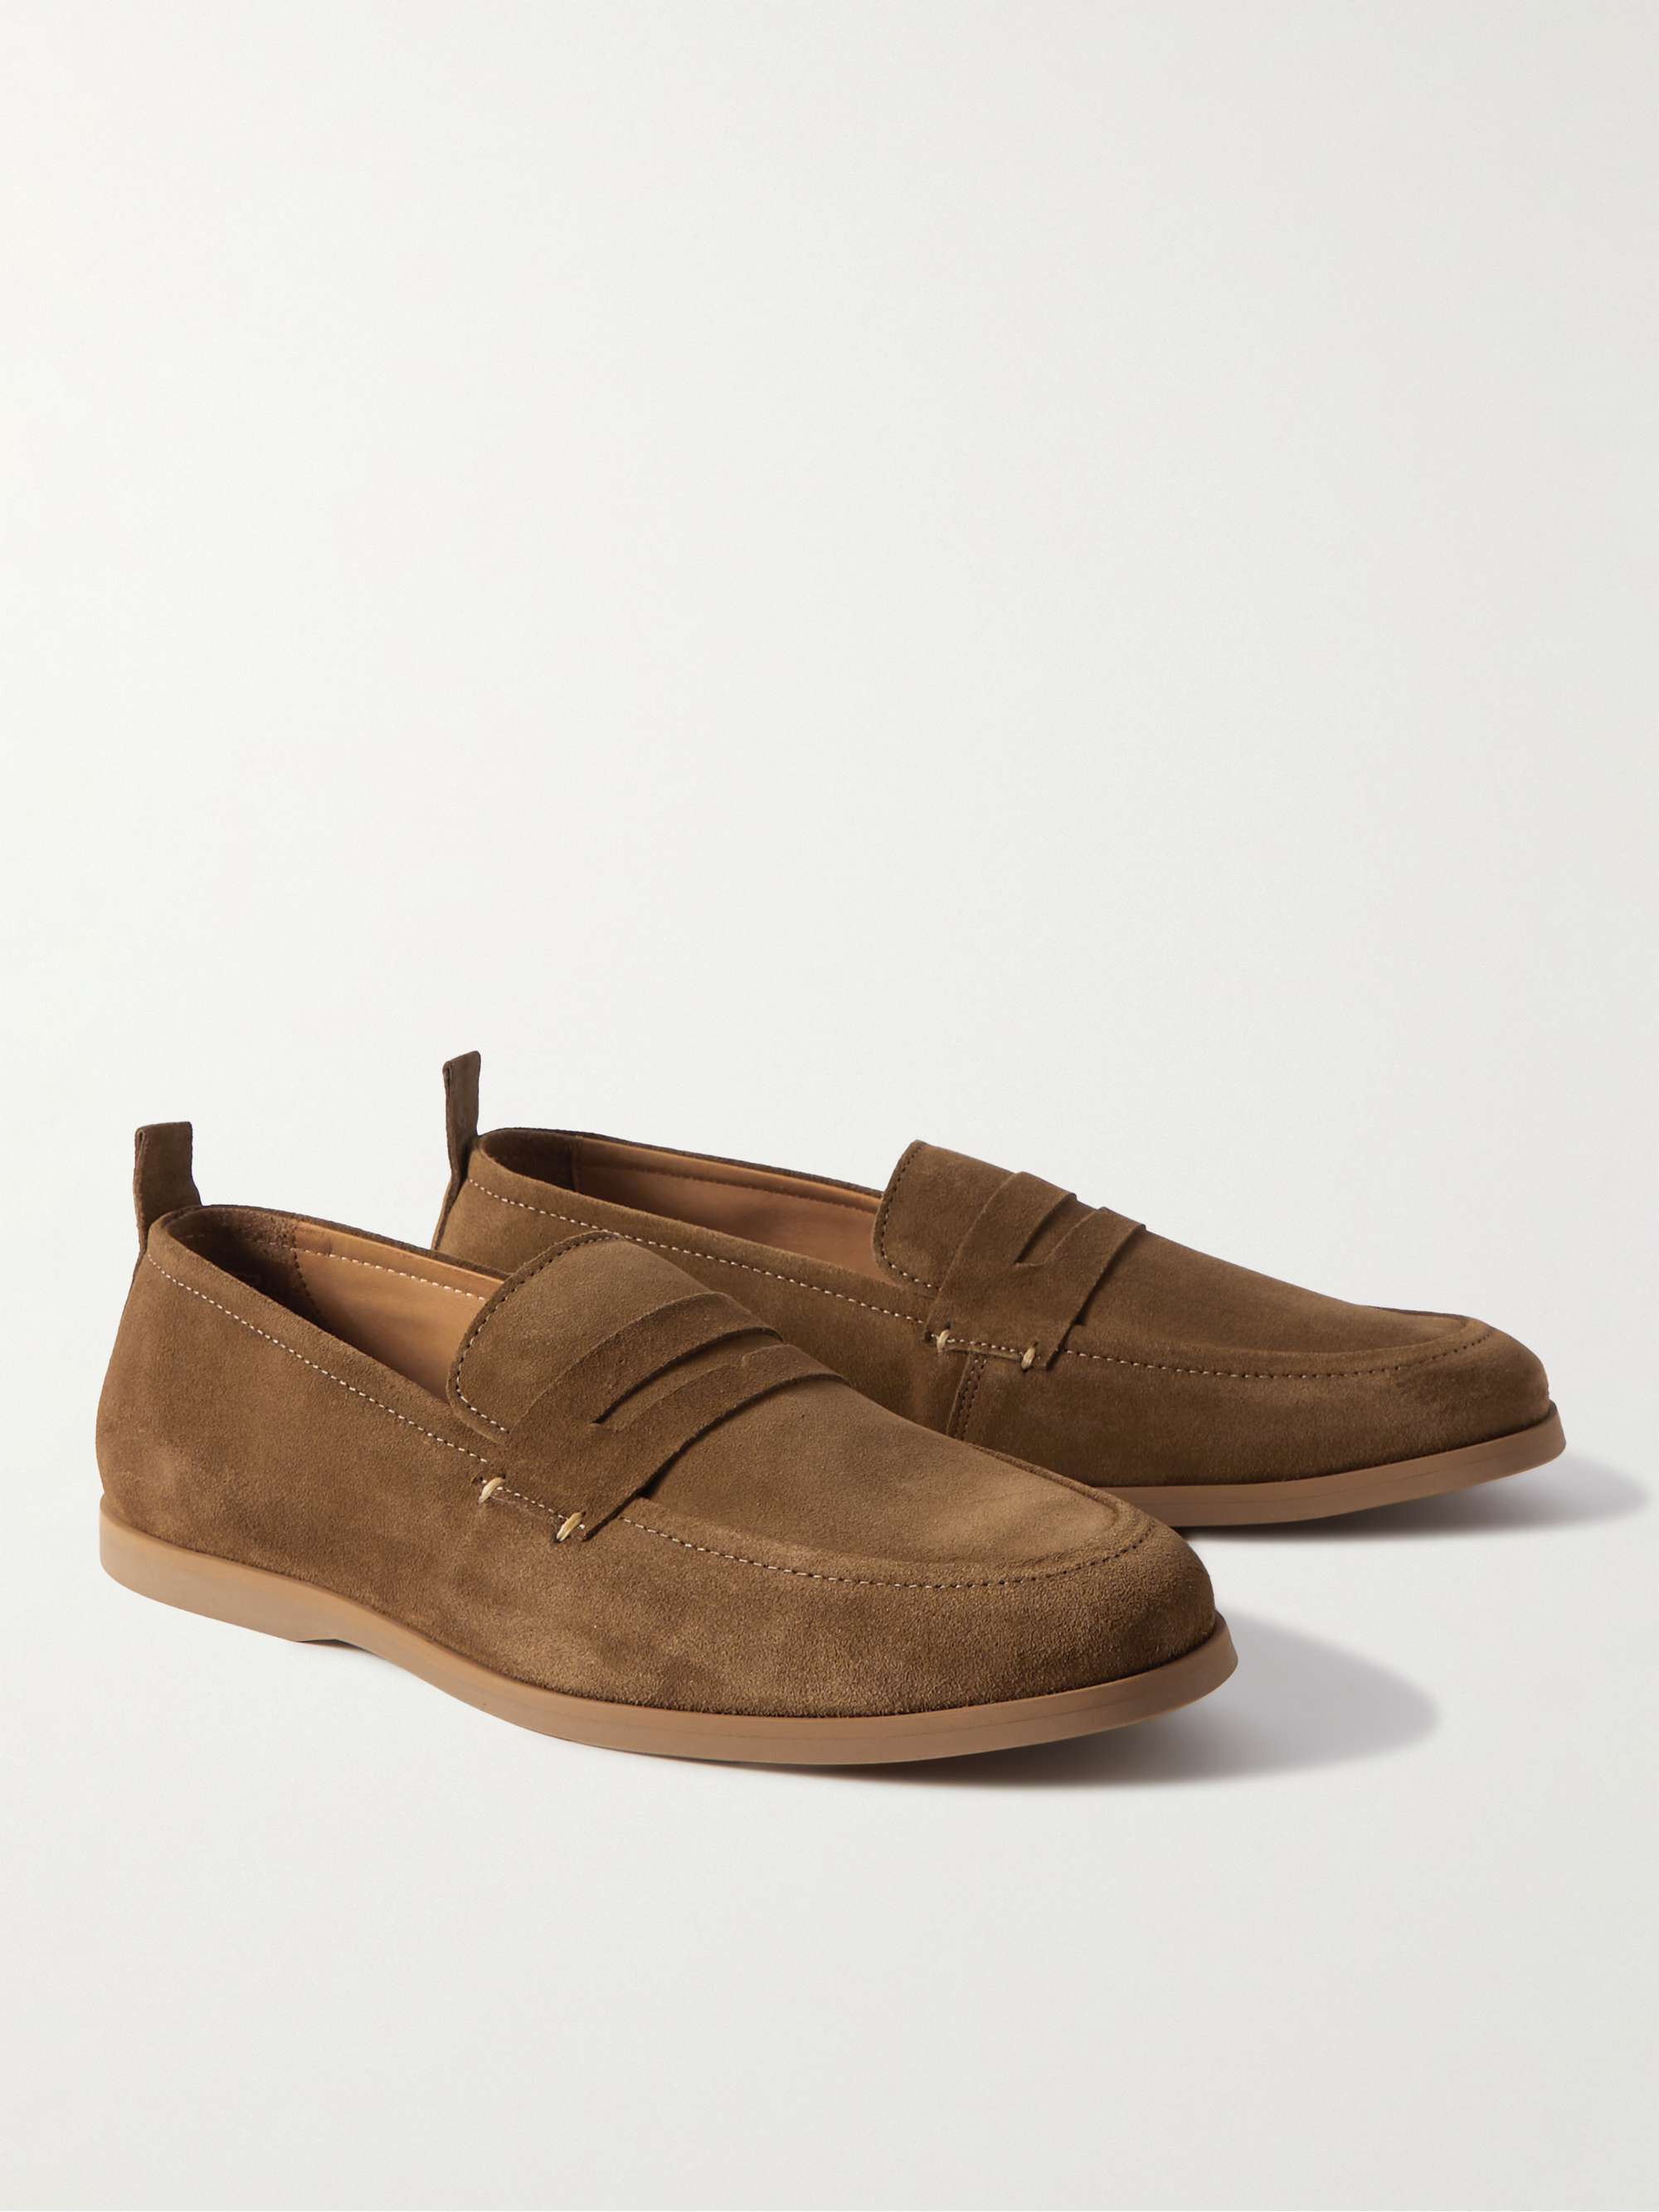 MR P. Regenerated Suede by evolo® Penny Loafers for Men | MR PORTER